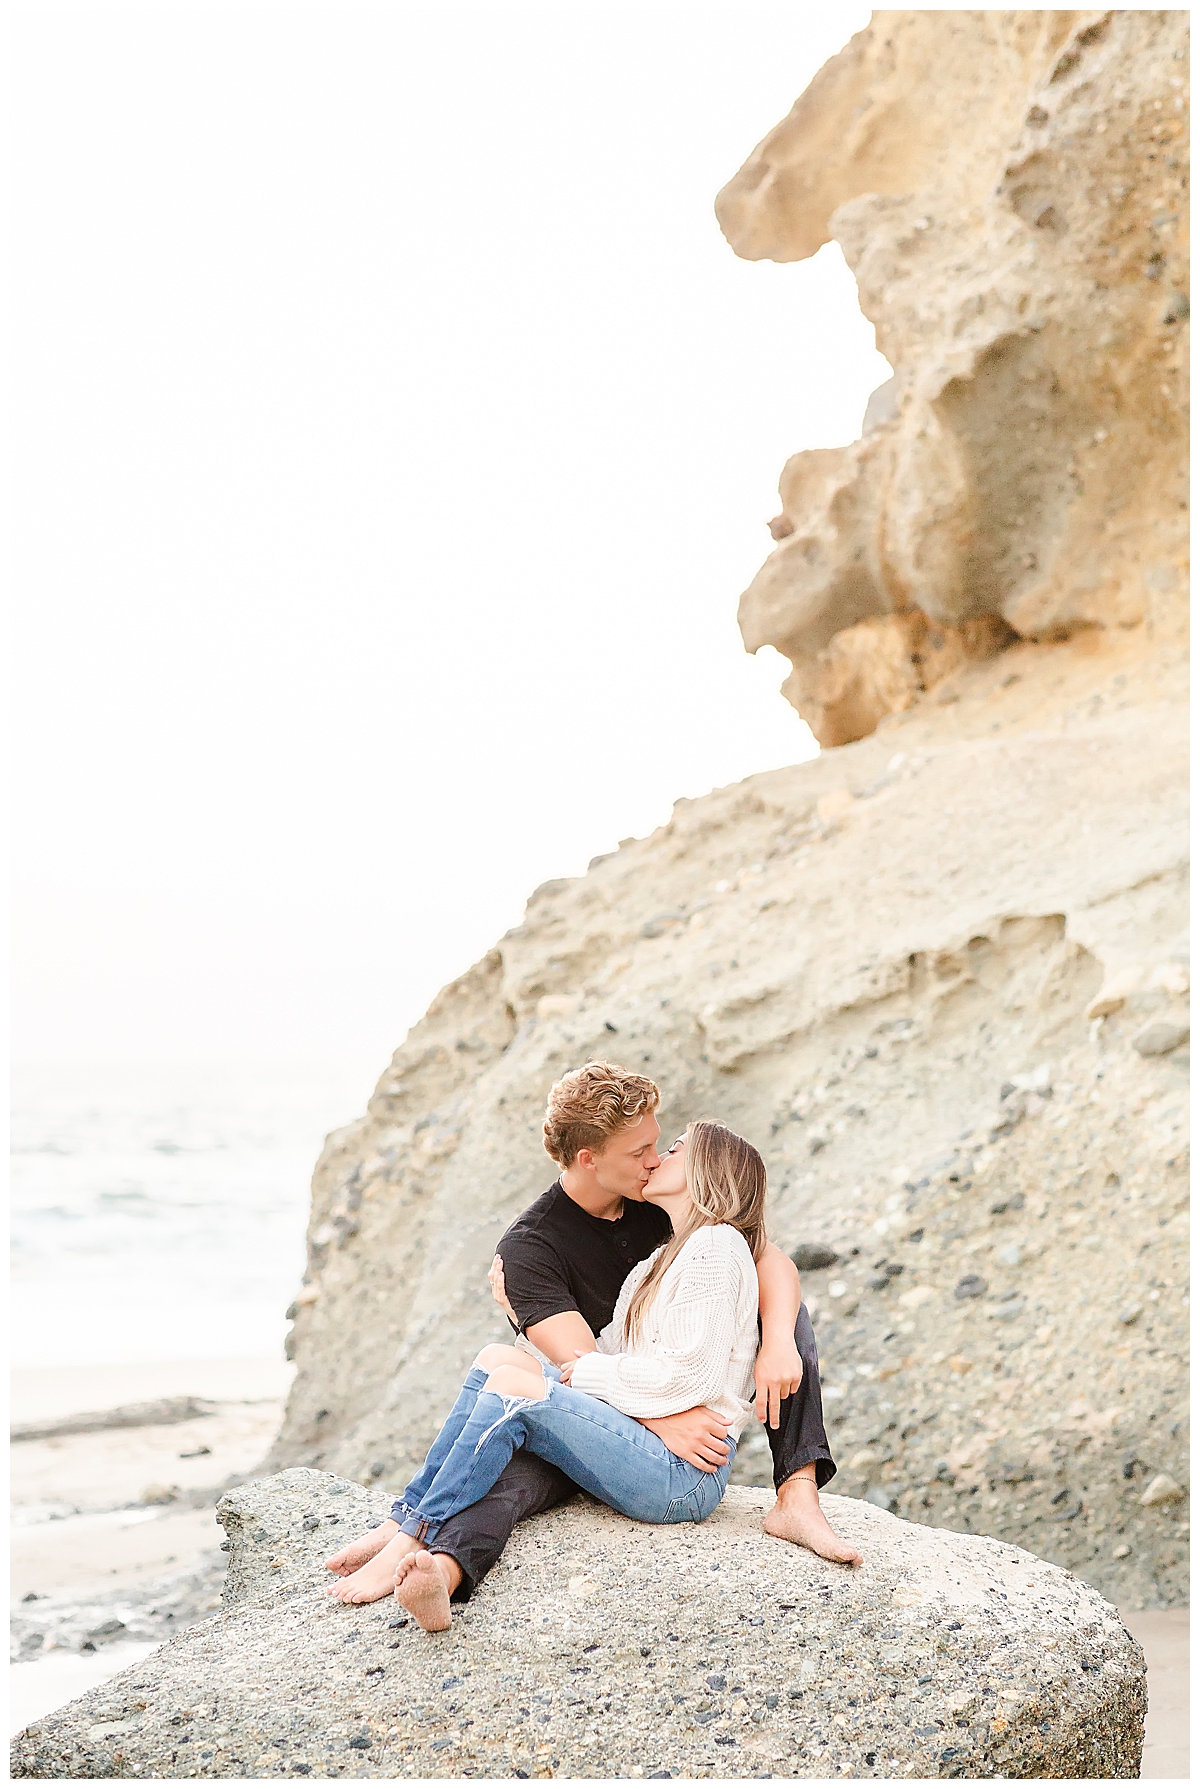 Couple kissing on rock